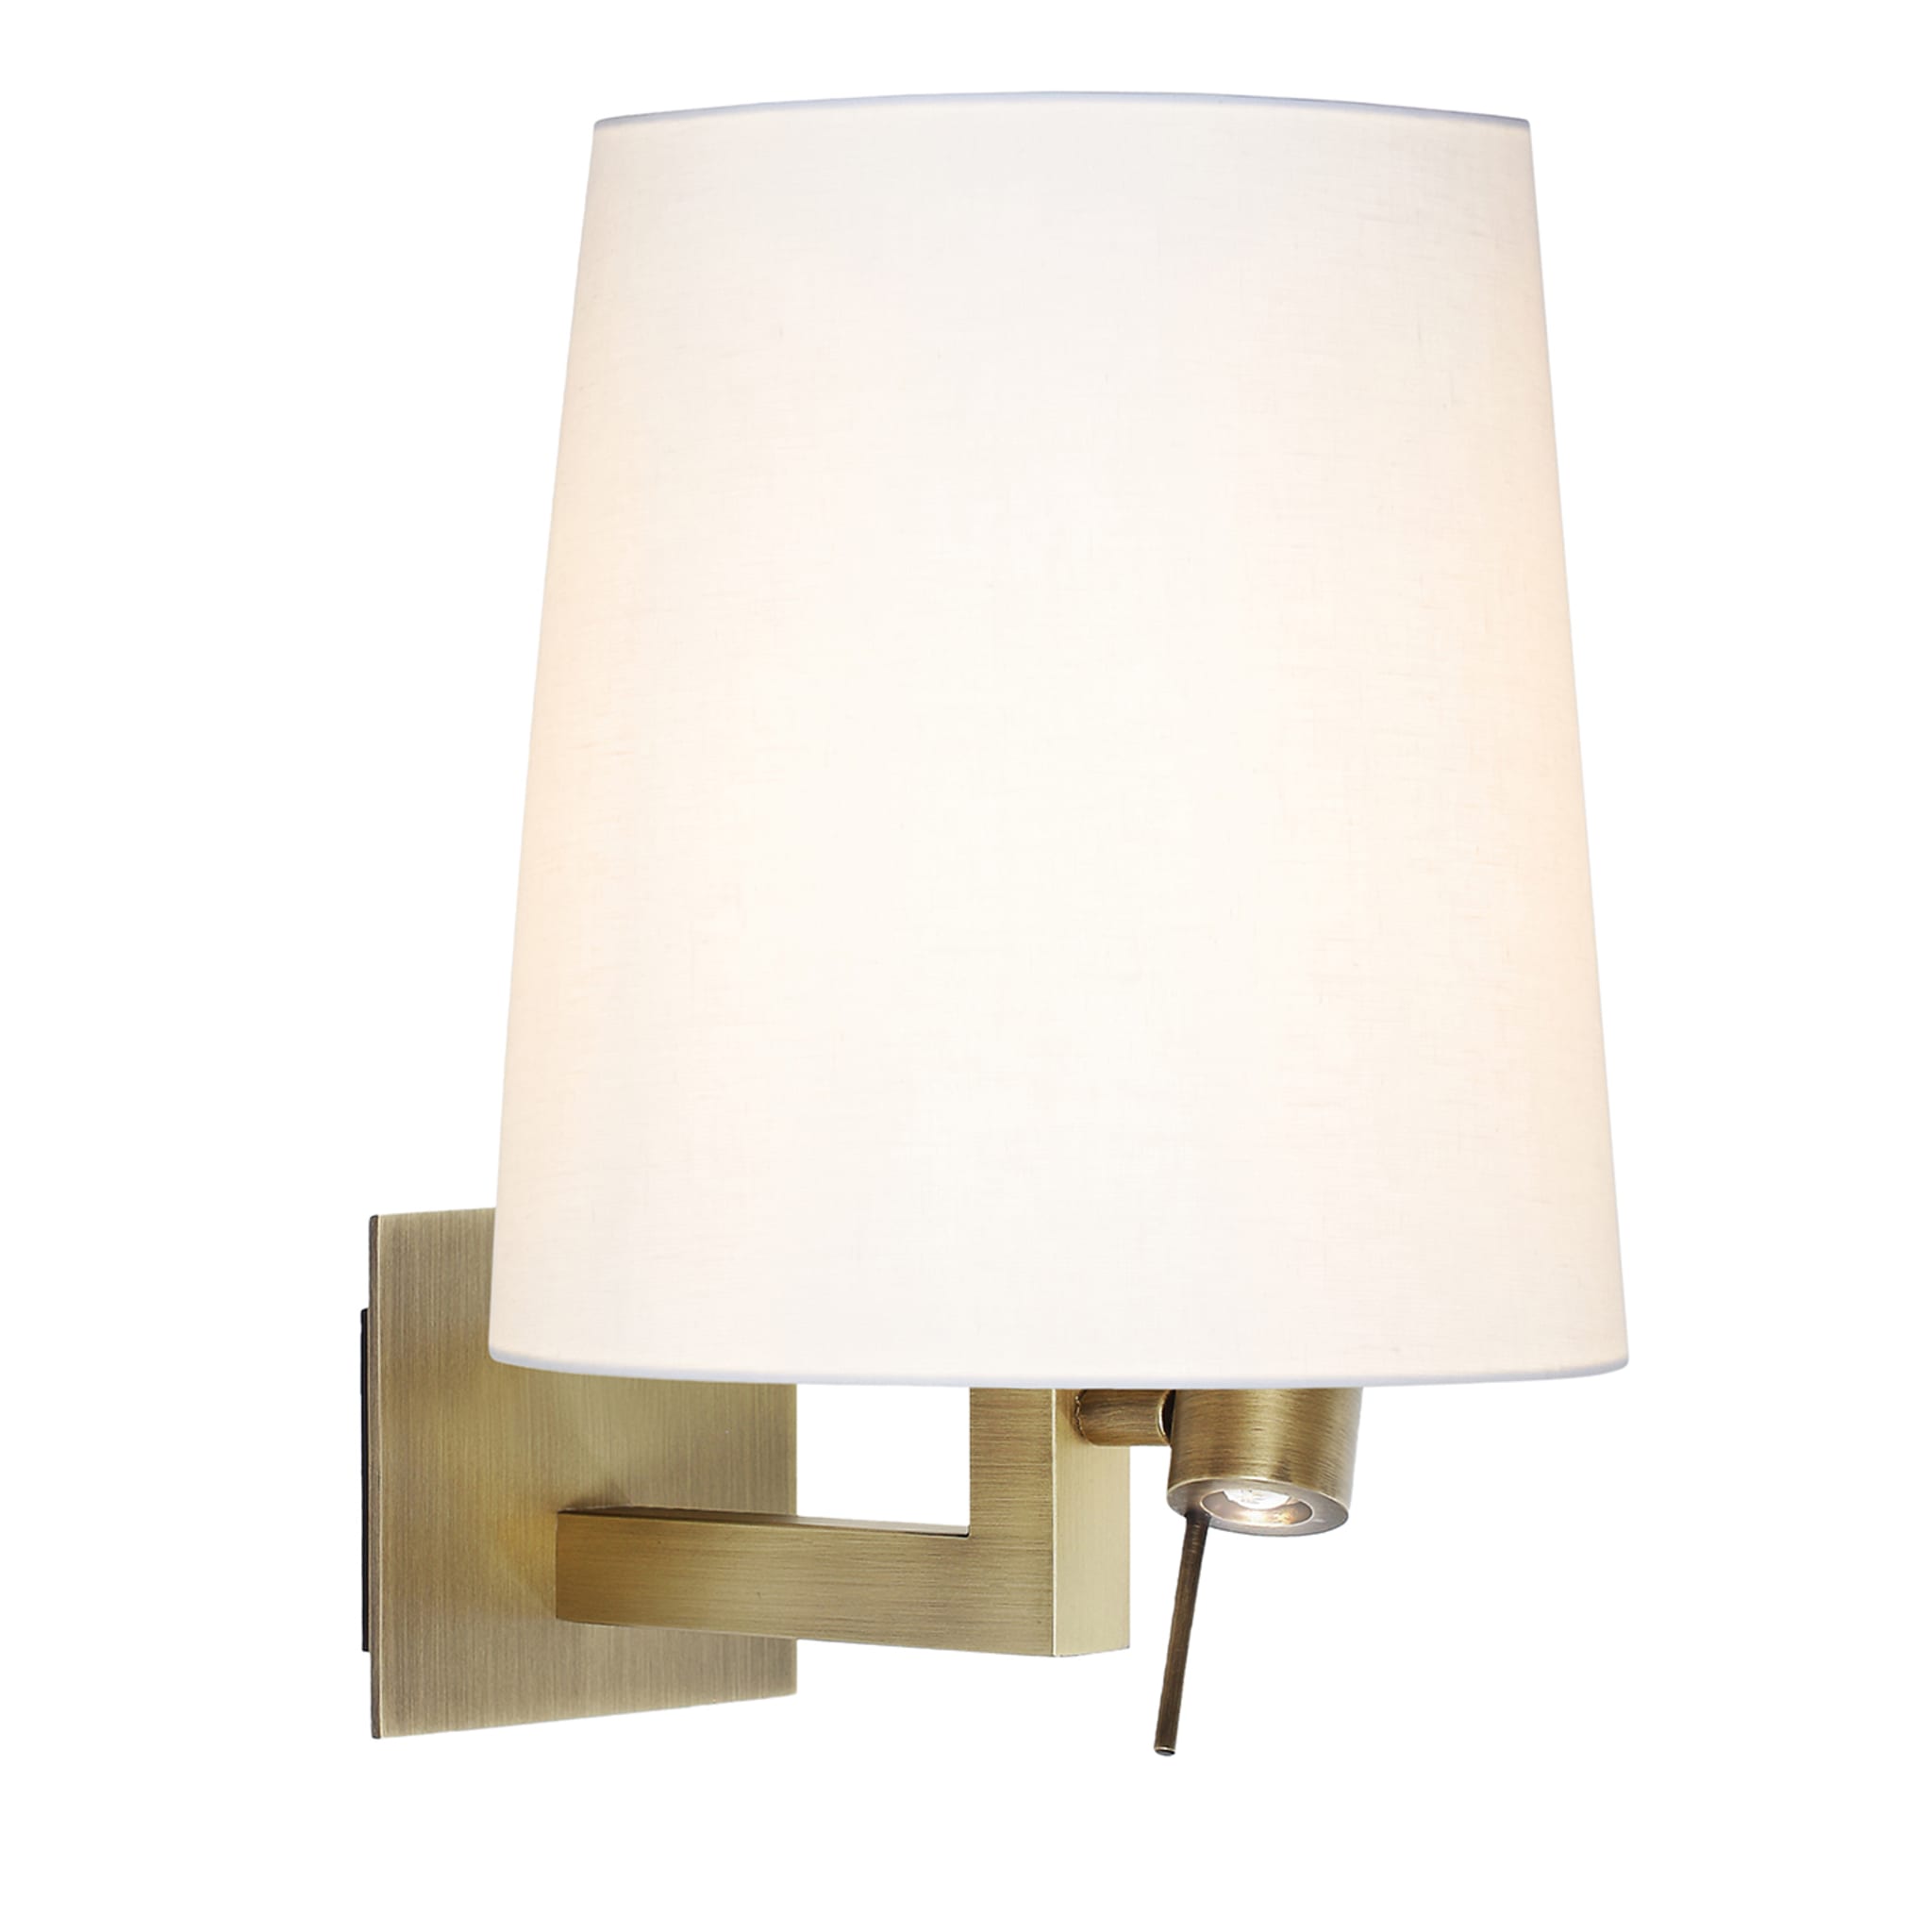 Tonda LED Bronzed Sconce with White Cotton Shade - Main view